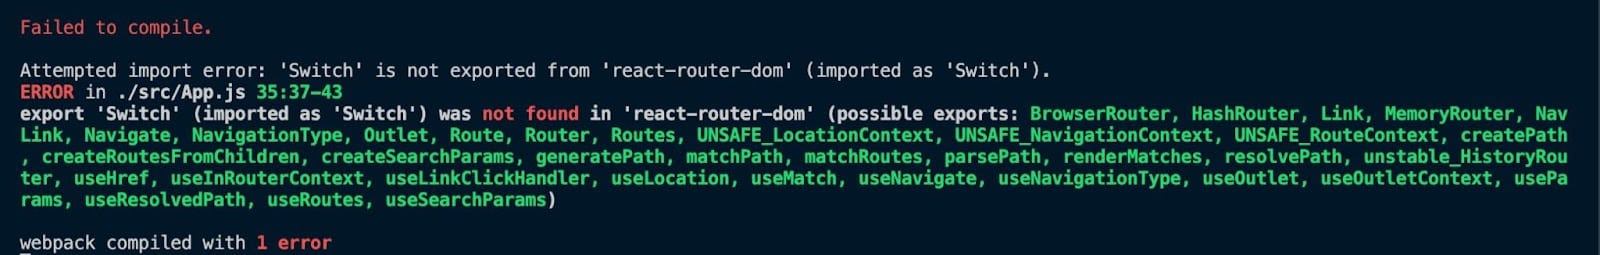 Switch' is not exported from 'react-router-dom Fehlermeldung